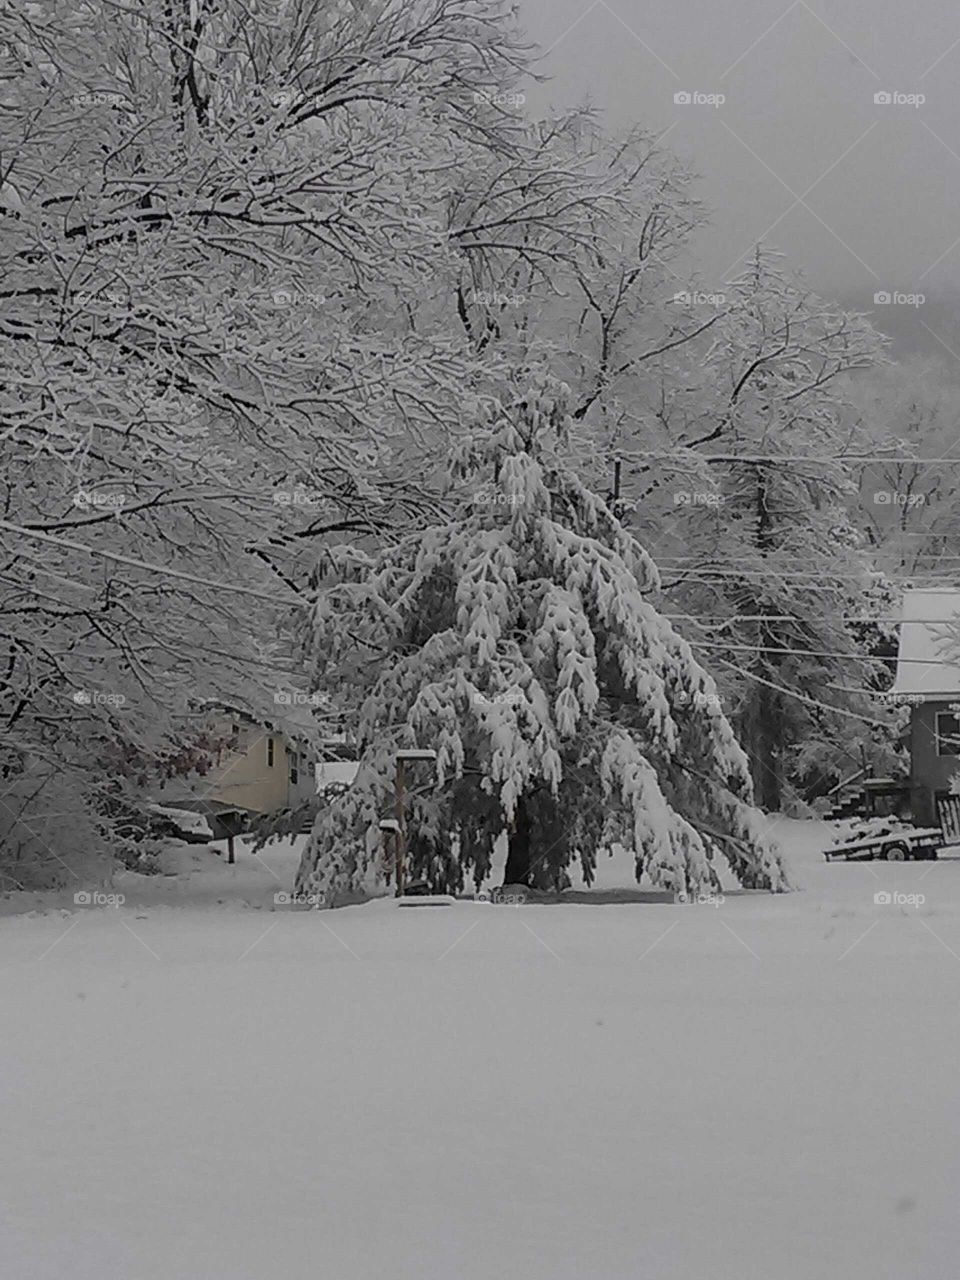 Tree Branches Weighed Down By Heavy Snowfall